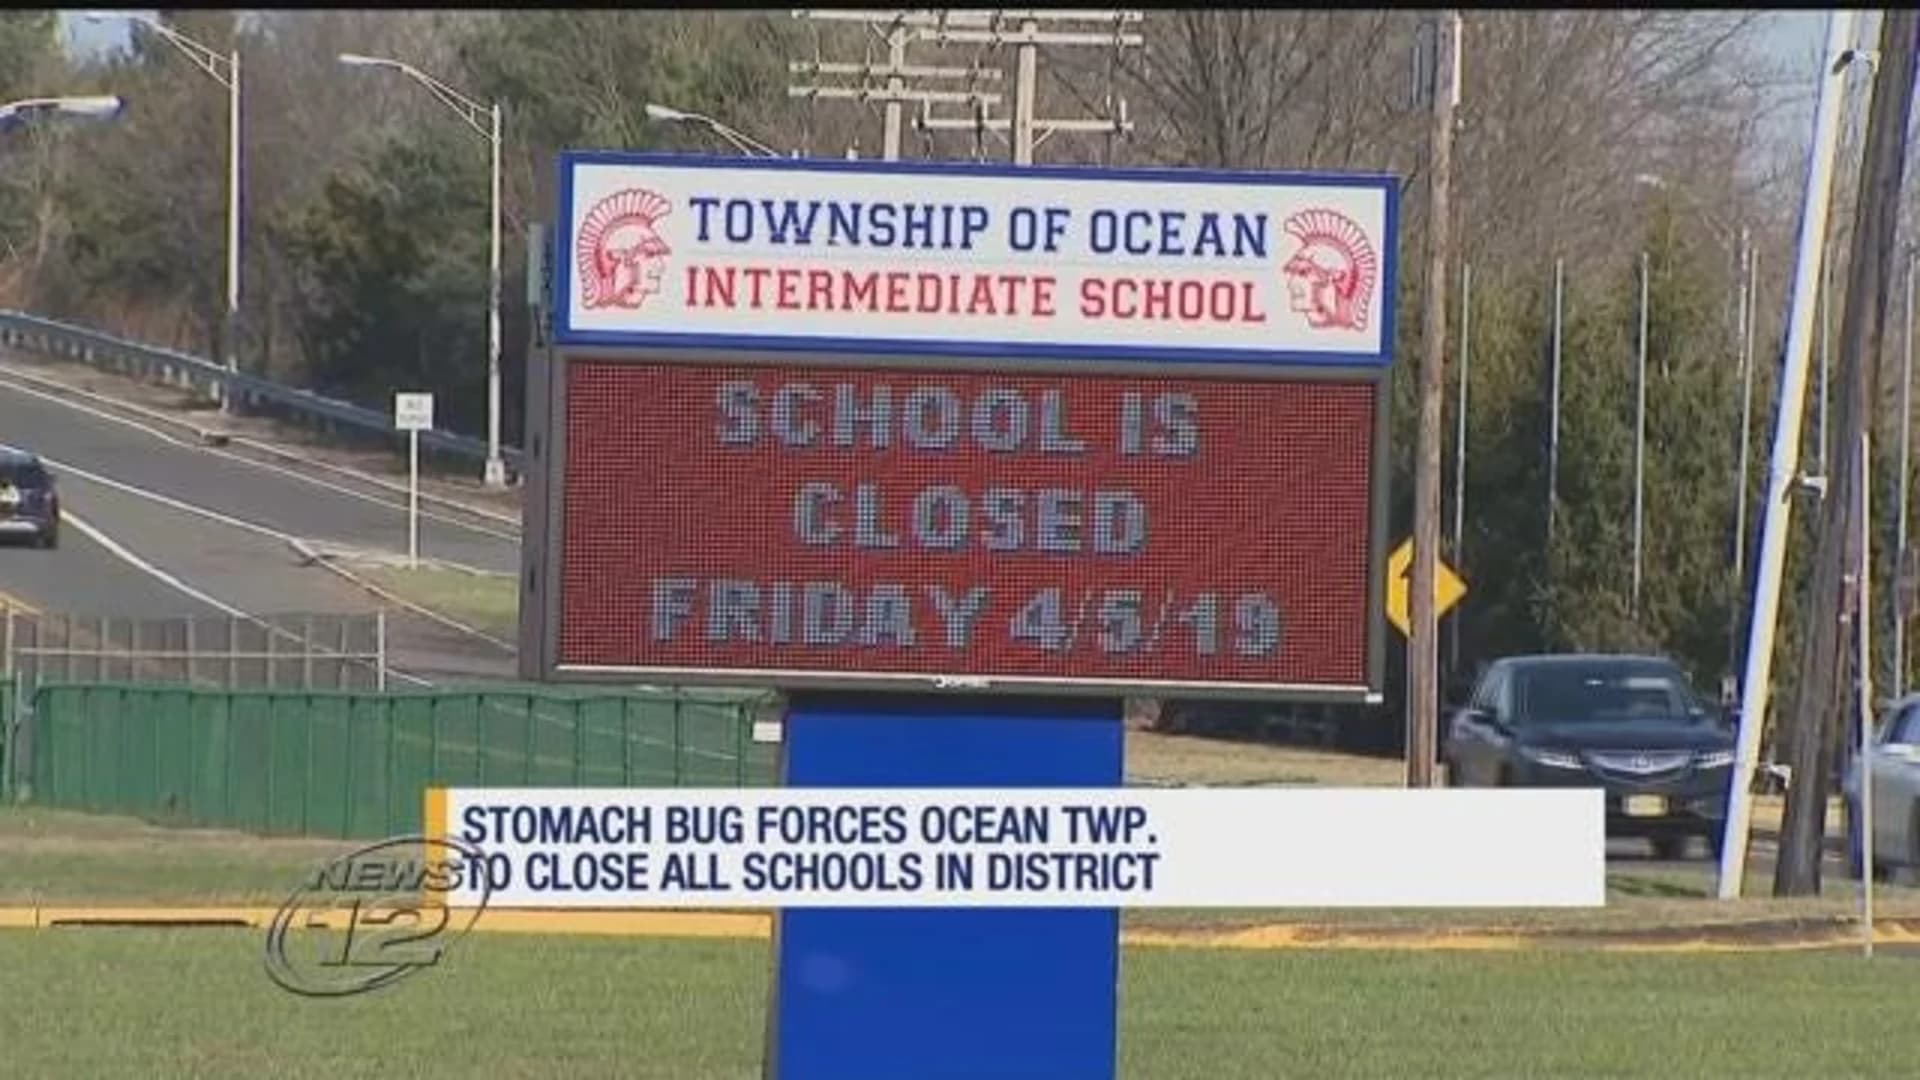 Ocean Township schools to reopen after stomach bug outbreak